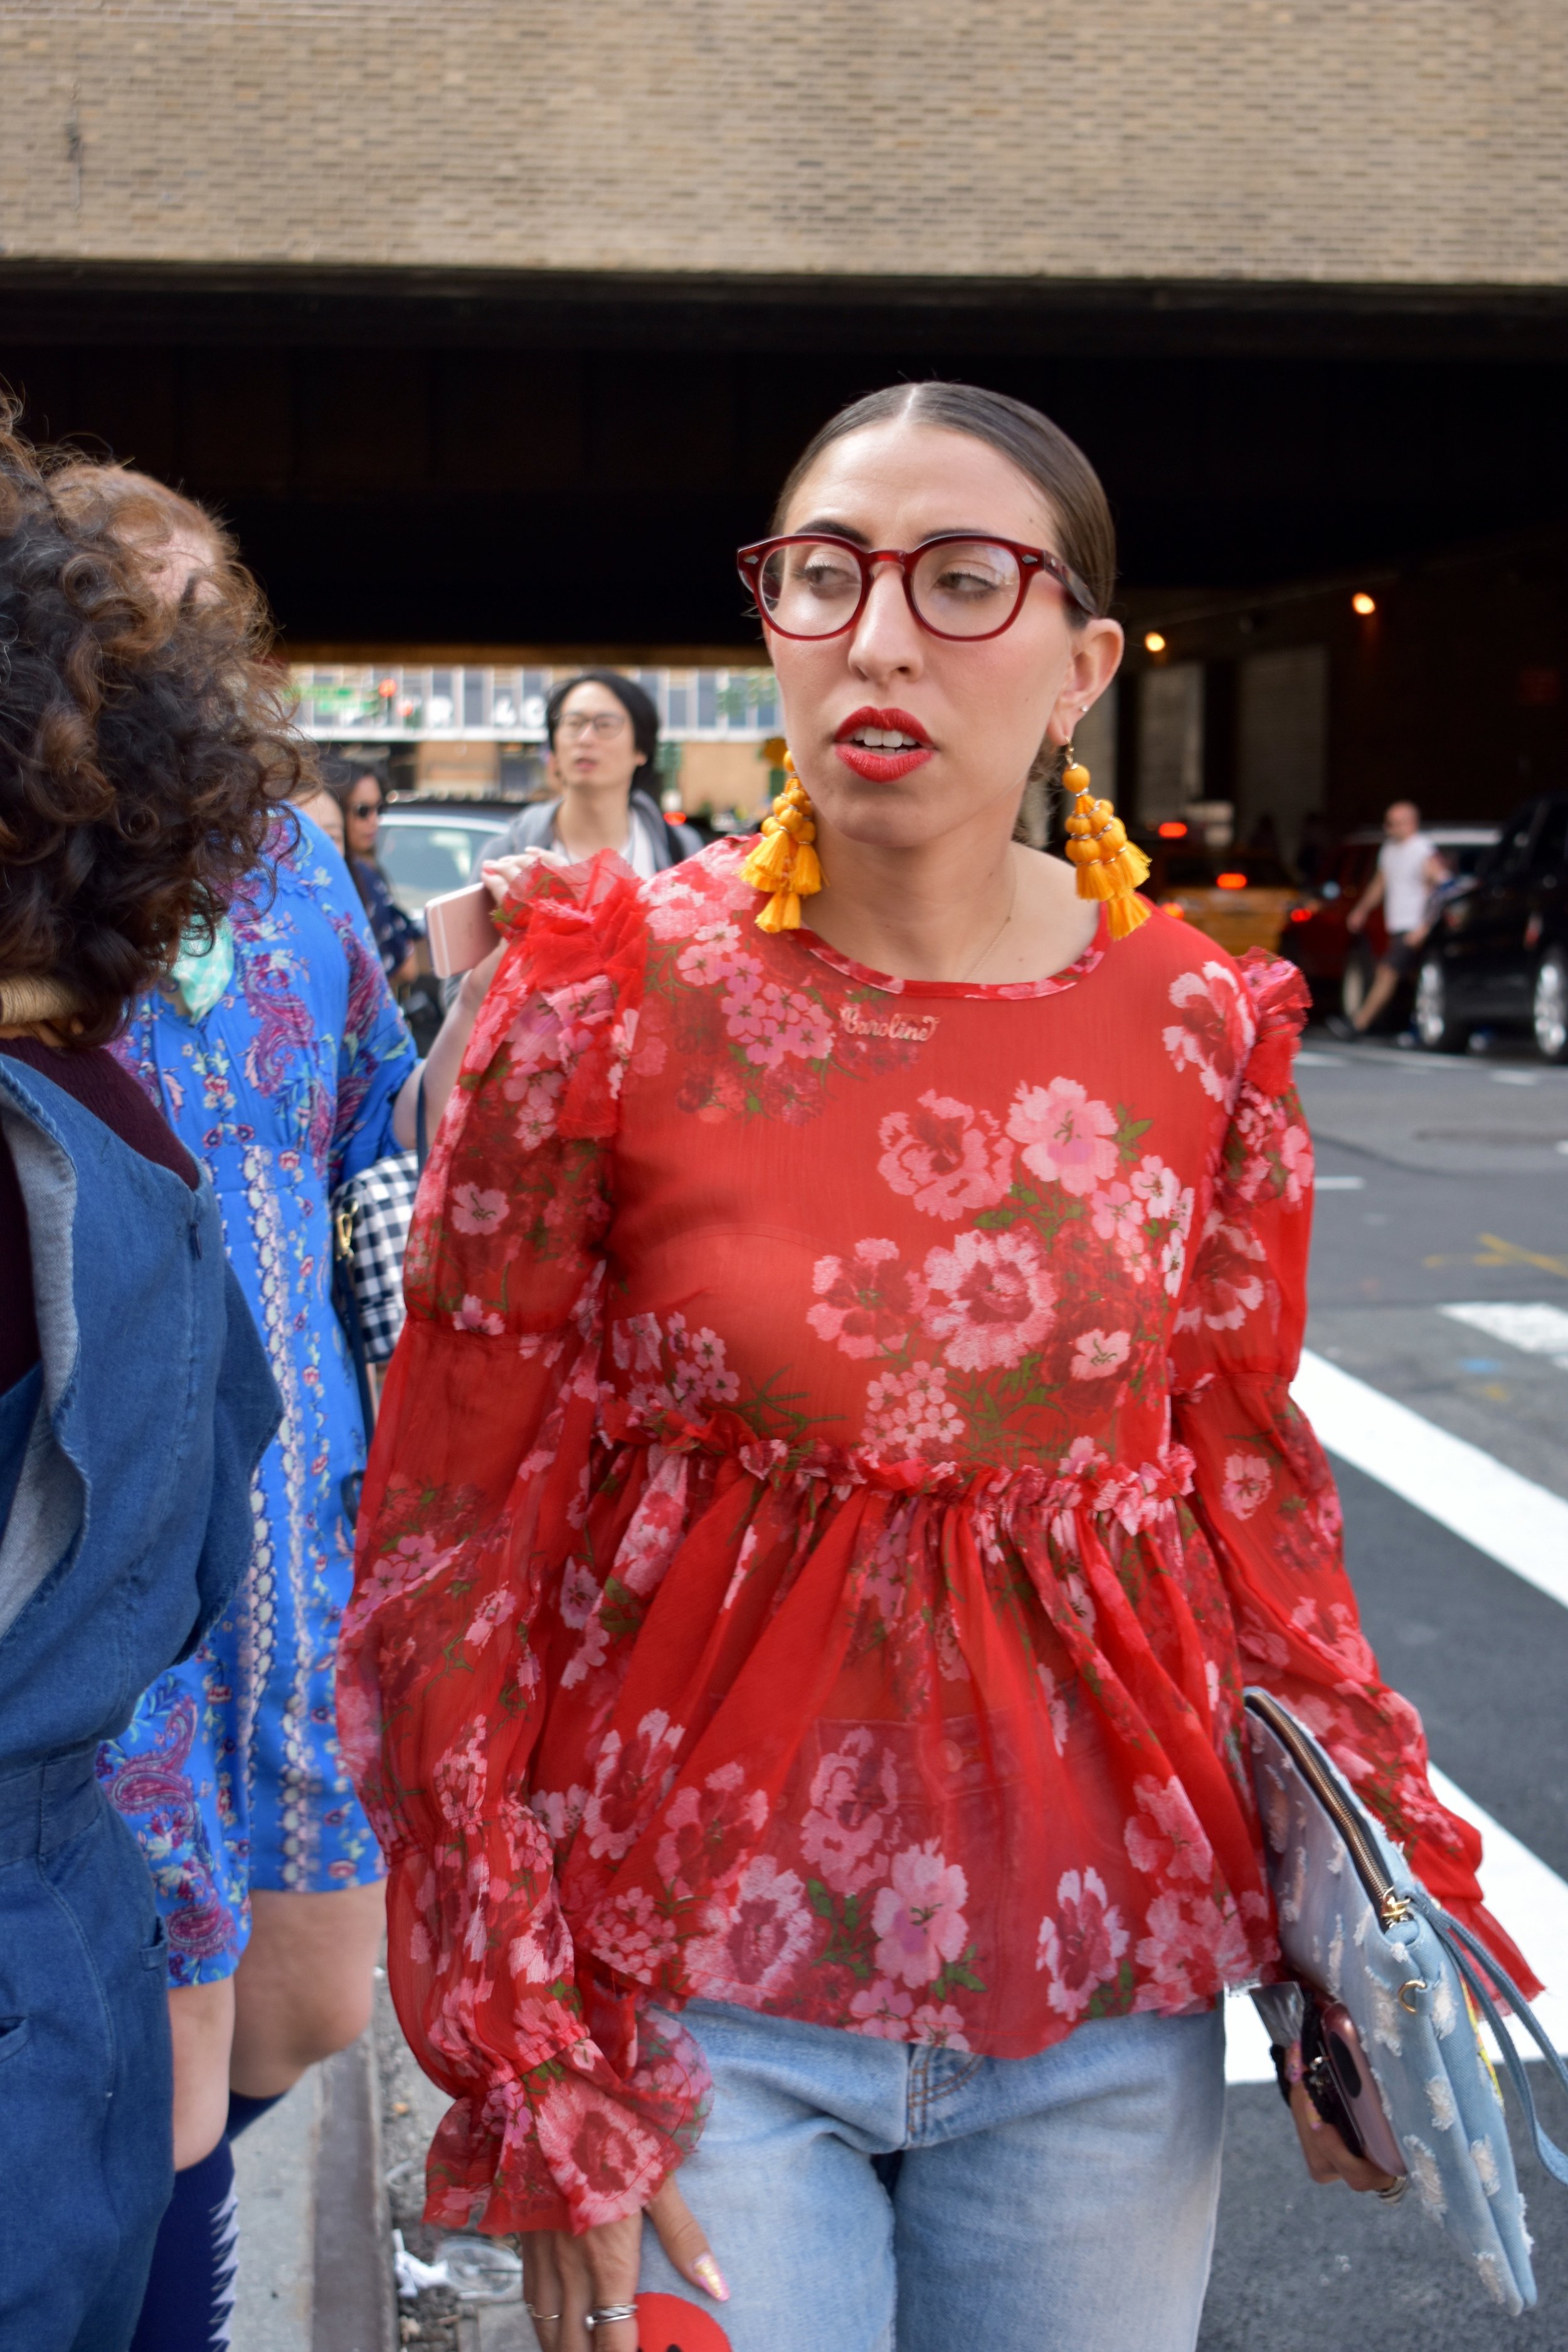 The Best Details on The Streets of NYFW — Now Let's Get Going x Ayoka ...